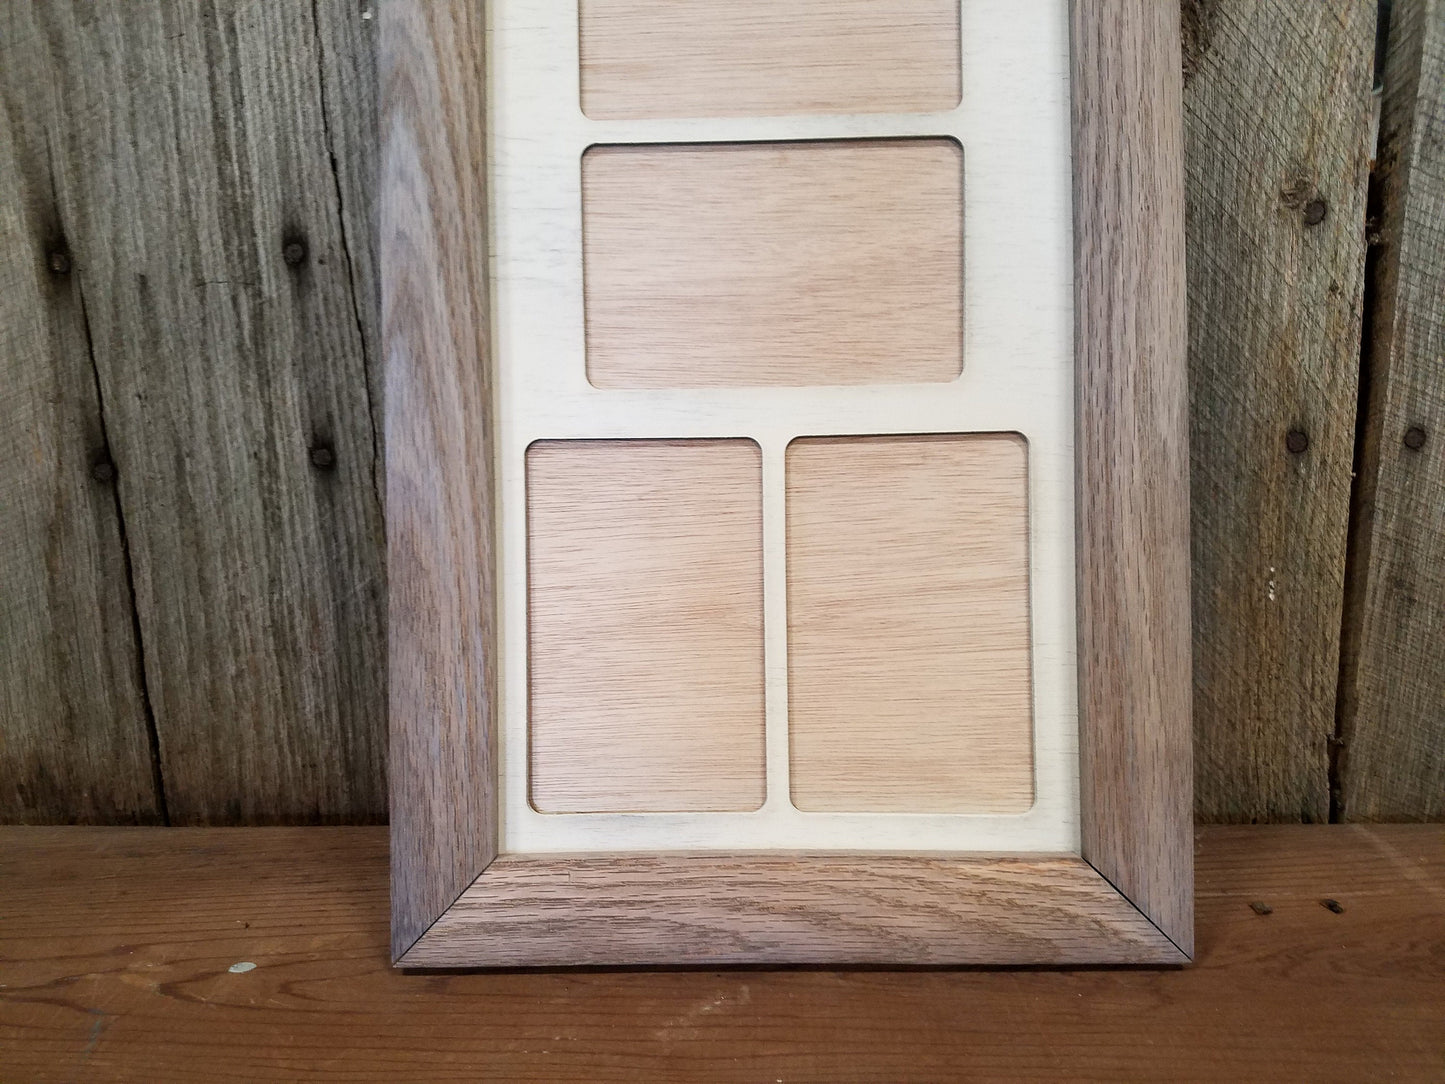 Farmhouse, 4x6, College, Picture Frame, Mat, Mat-board, Wood, Holds 6, Weathered Oak, Handmade, Country, Rustic, Primitive, Multiple